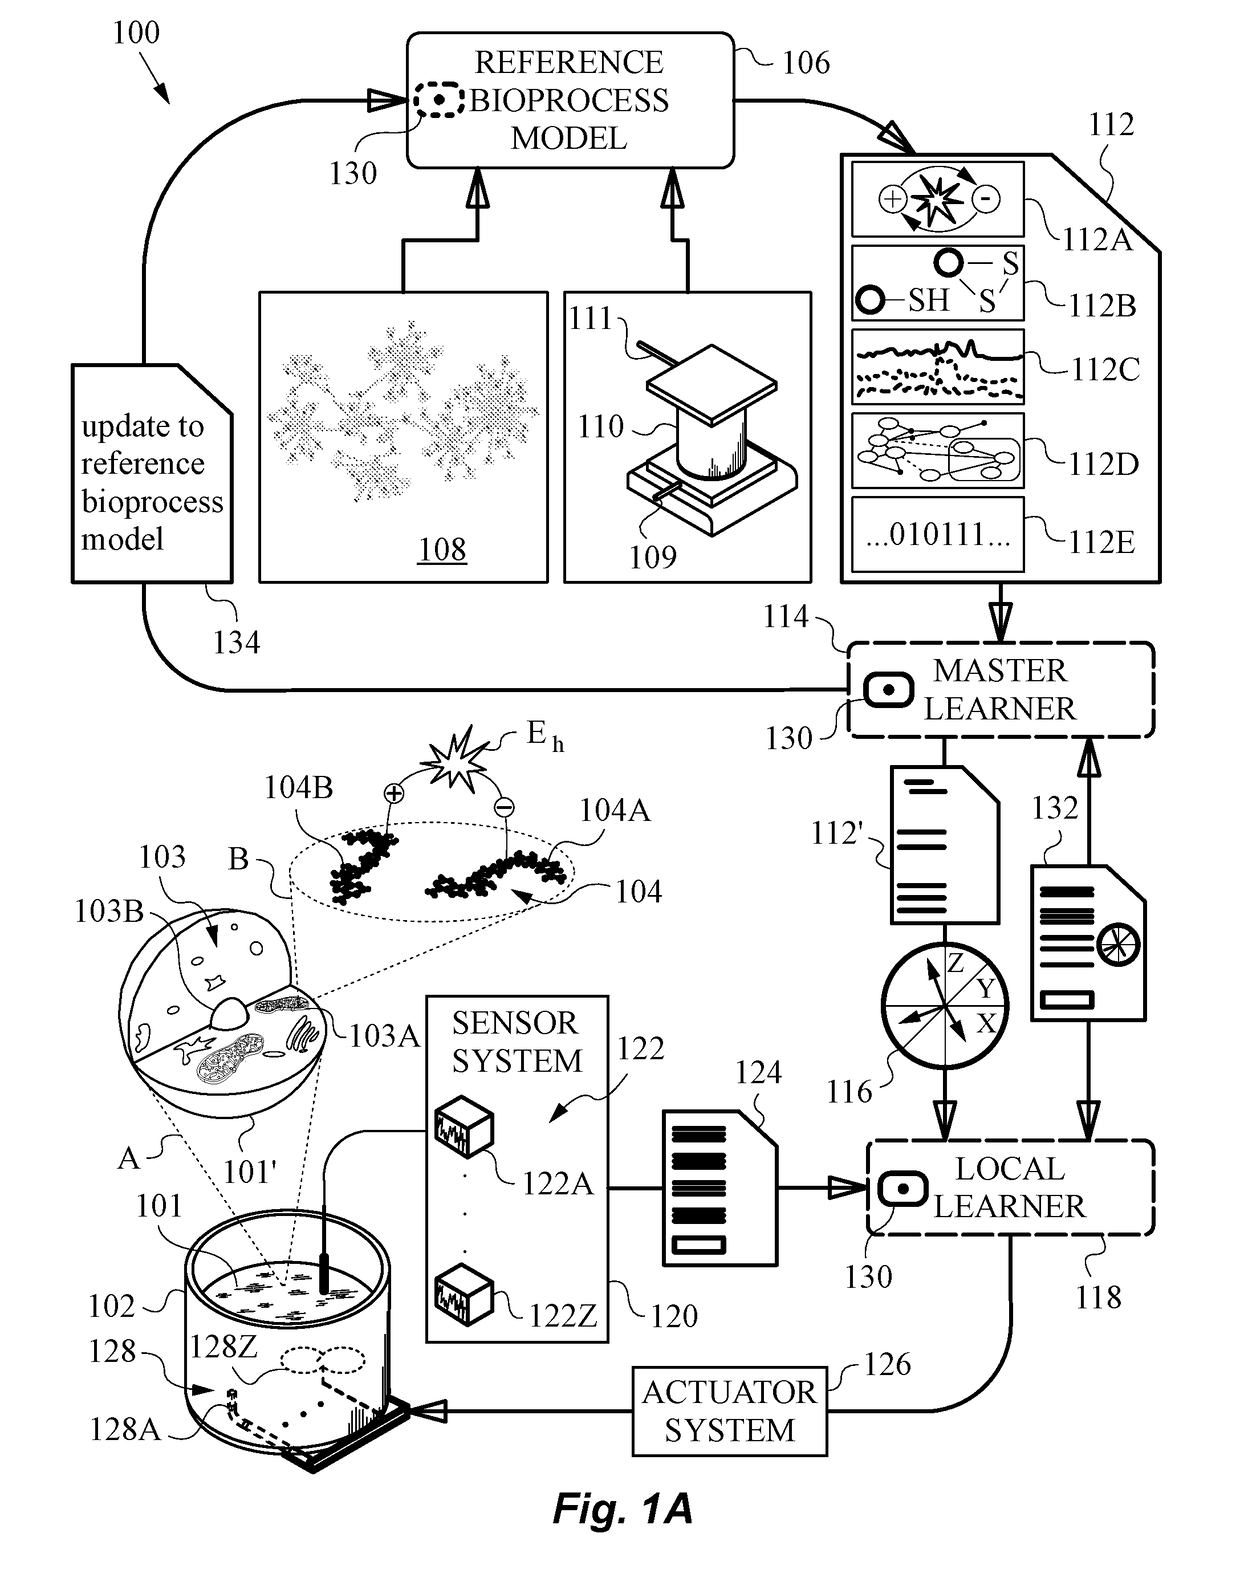 Redox-related context adjustments to a bioprocess monitored by learning systems and methods based on redox indicators